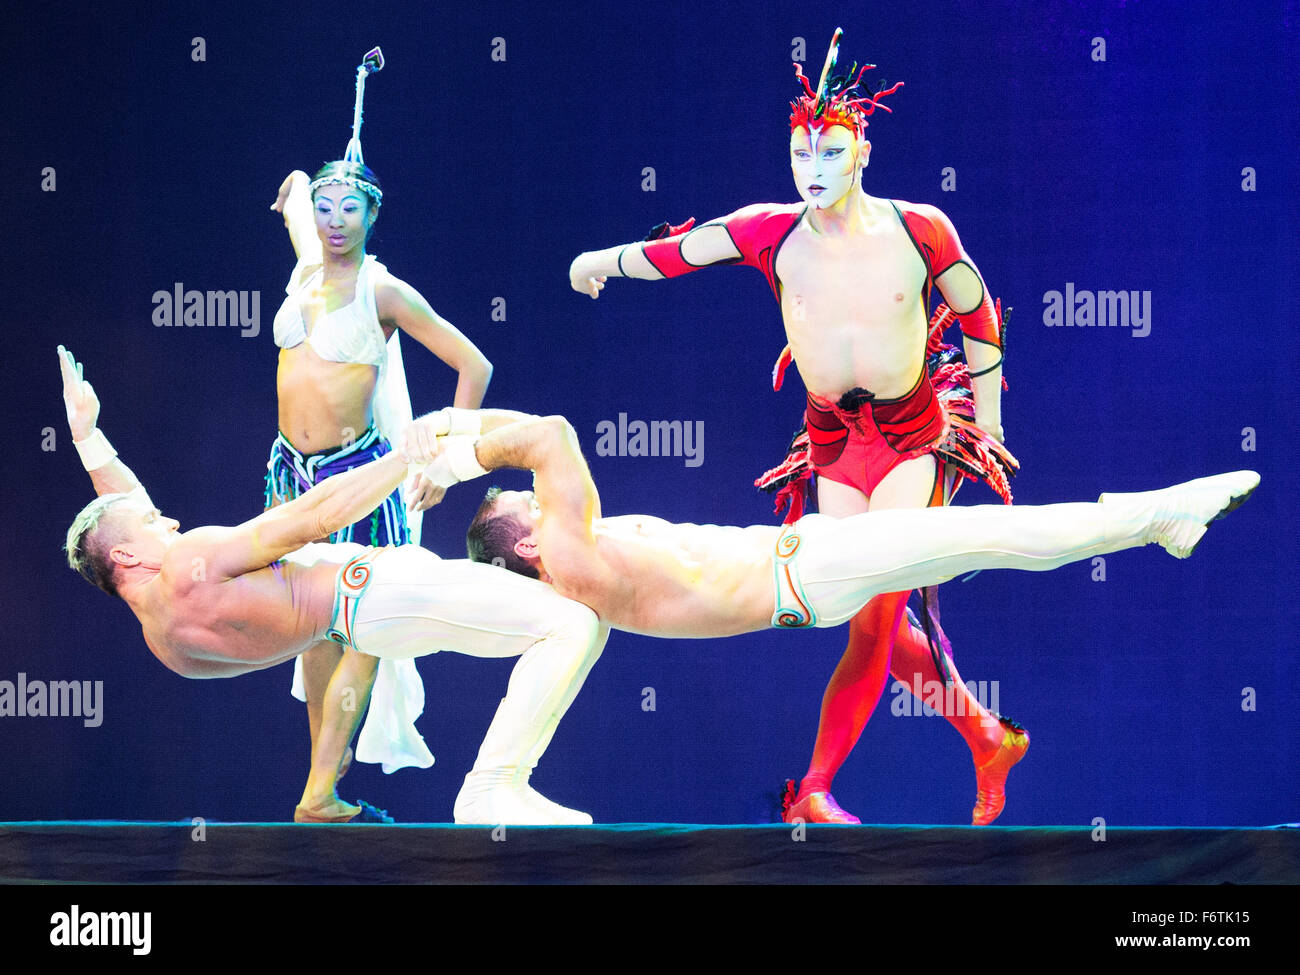 Houston, Texas, USA. 19th November, 2015. November 19, 2015:  Cirque du Soliel acrobats perform during the Opening Ceremonies of the 2015 World Weightlifting Championships in Houston, Texas. Credit:  Brent Clark/Alamy Live News Stock Photo